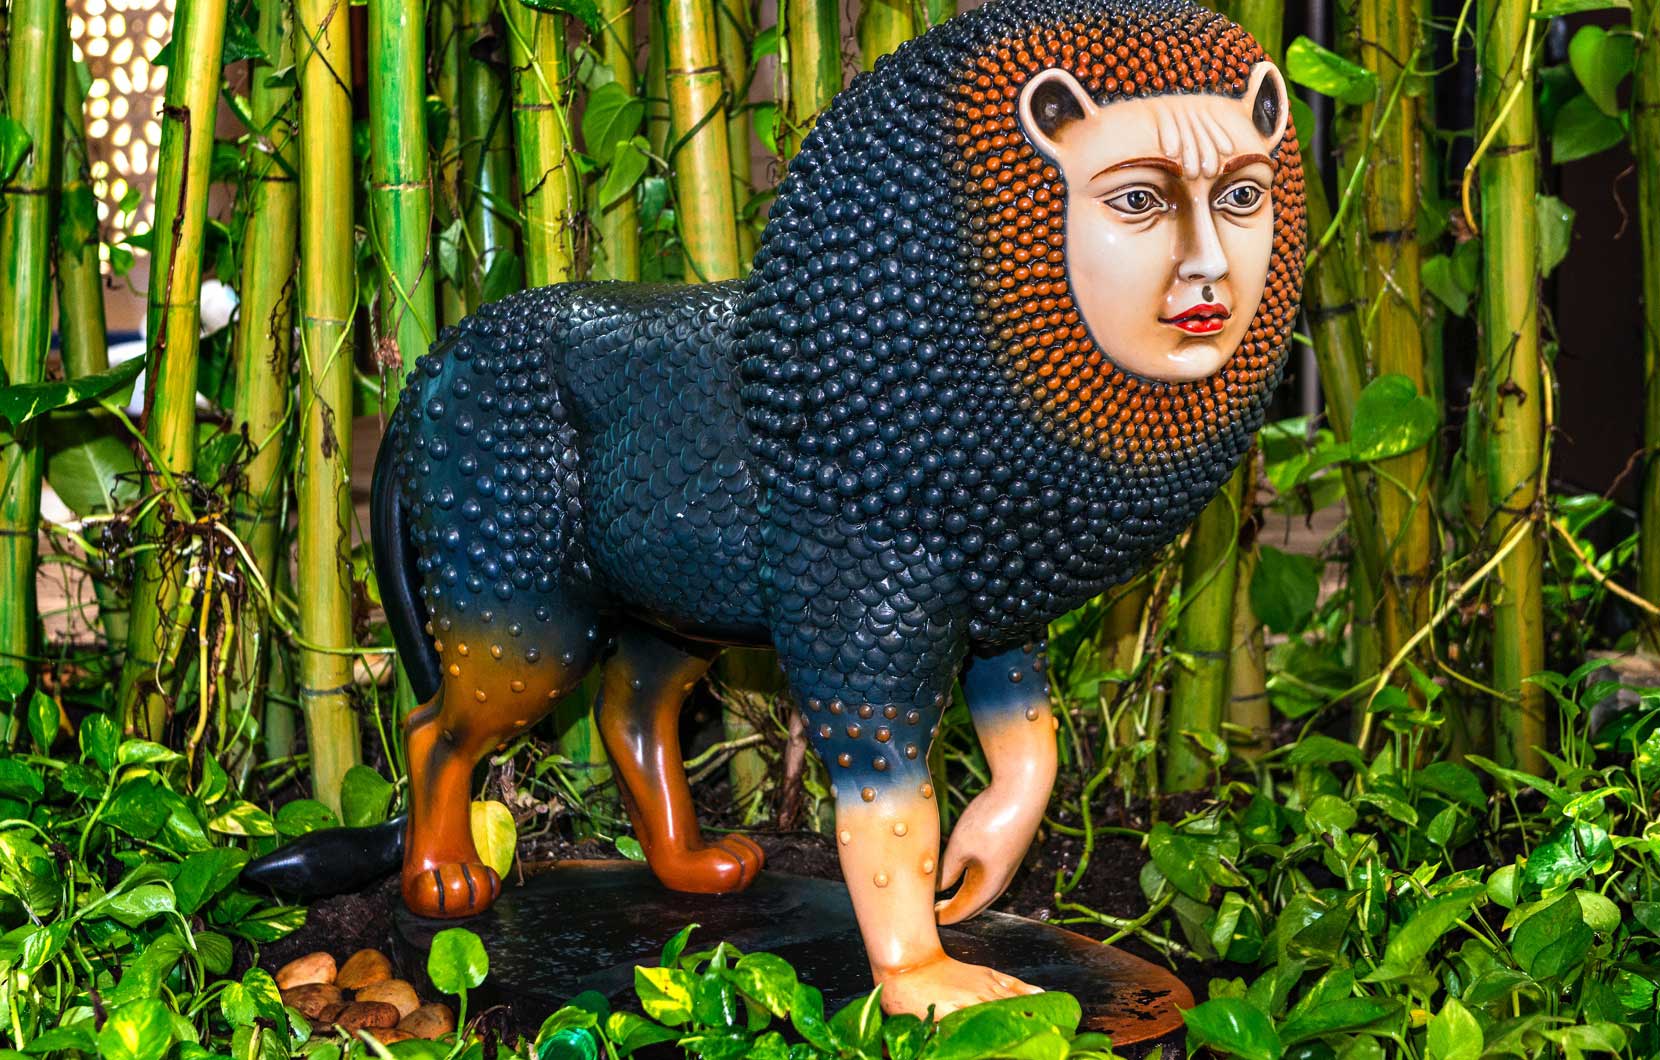 One of Bustamante's fantastical creatures perched in the gardens at Spatium.